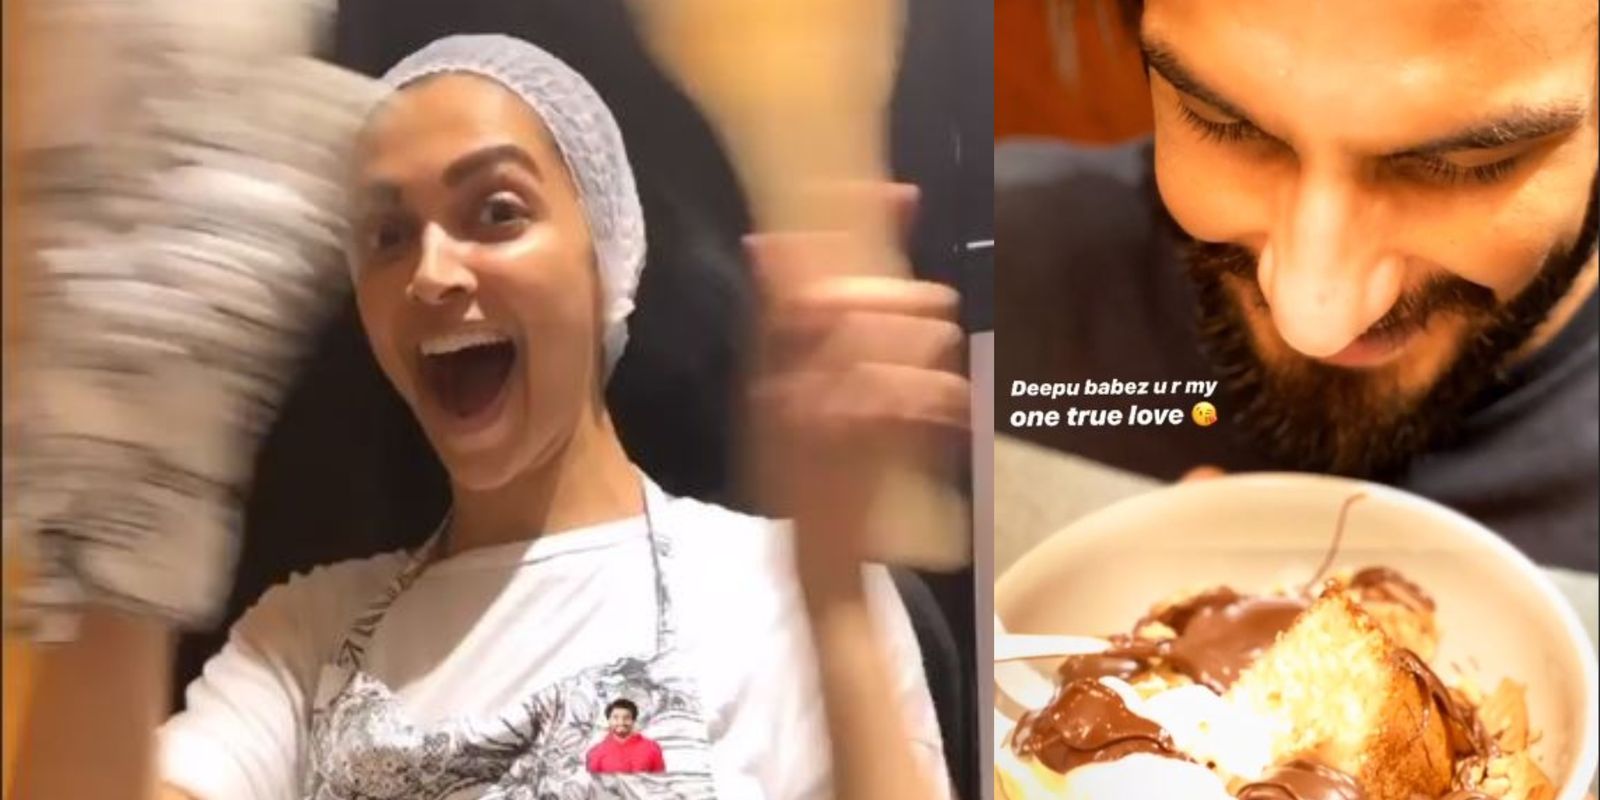 Ranveer Singh Gives Us A Glimpse Of Deepika Padukone’s Culinary Skills, Shares Pictures Of Yummy Food She Cooked For Dinner